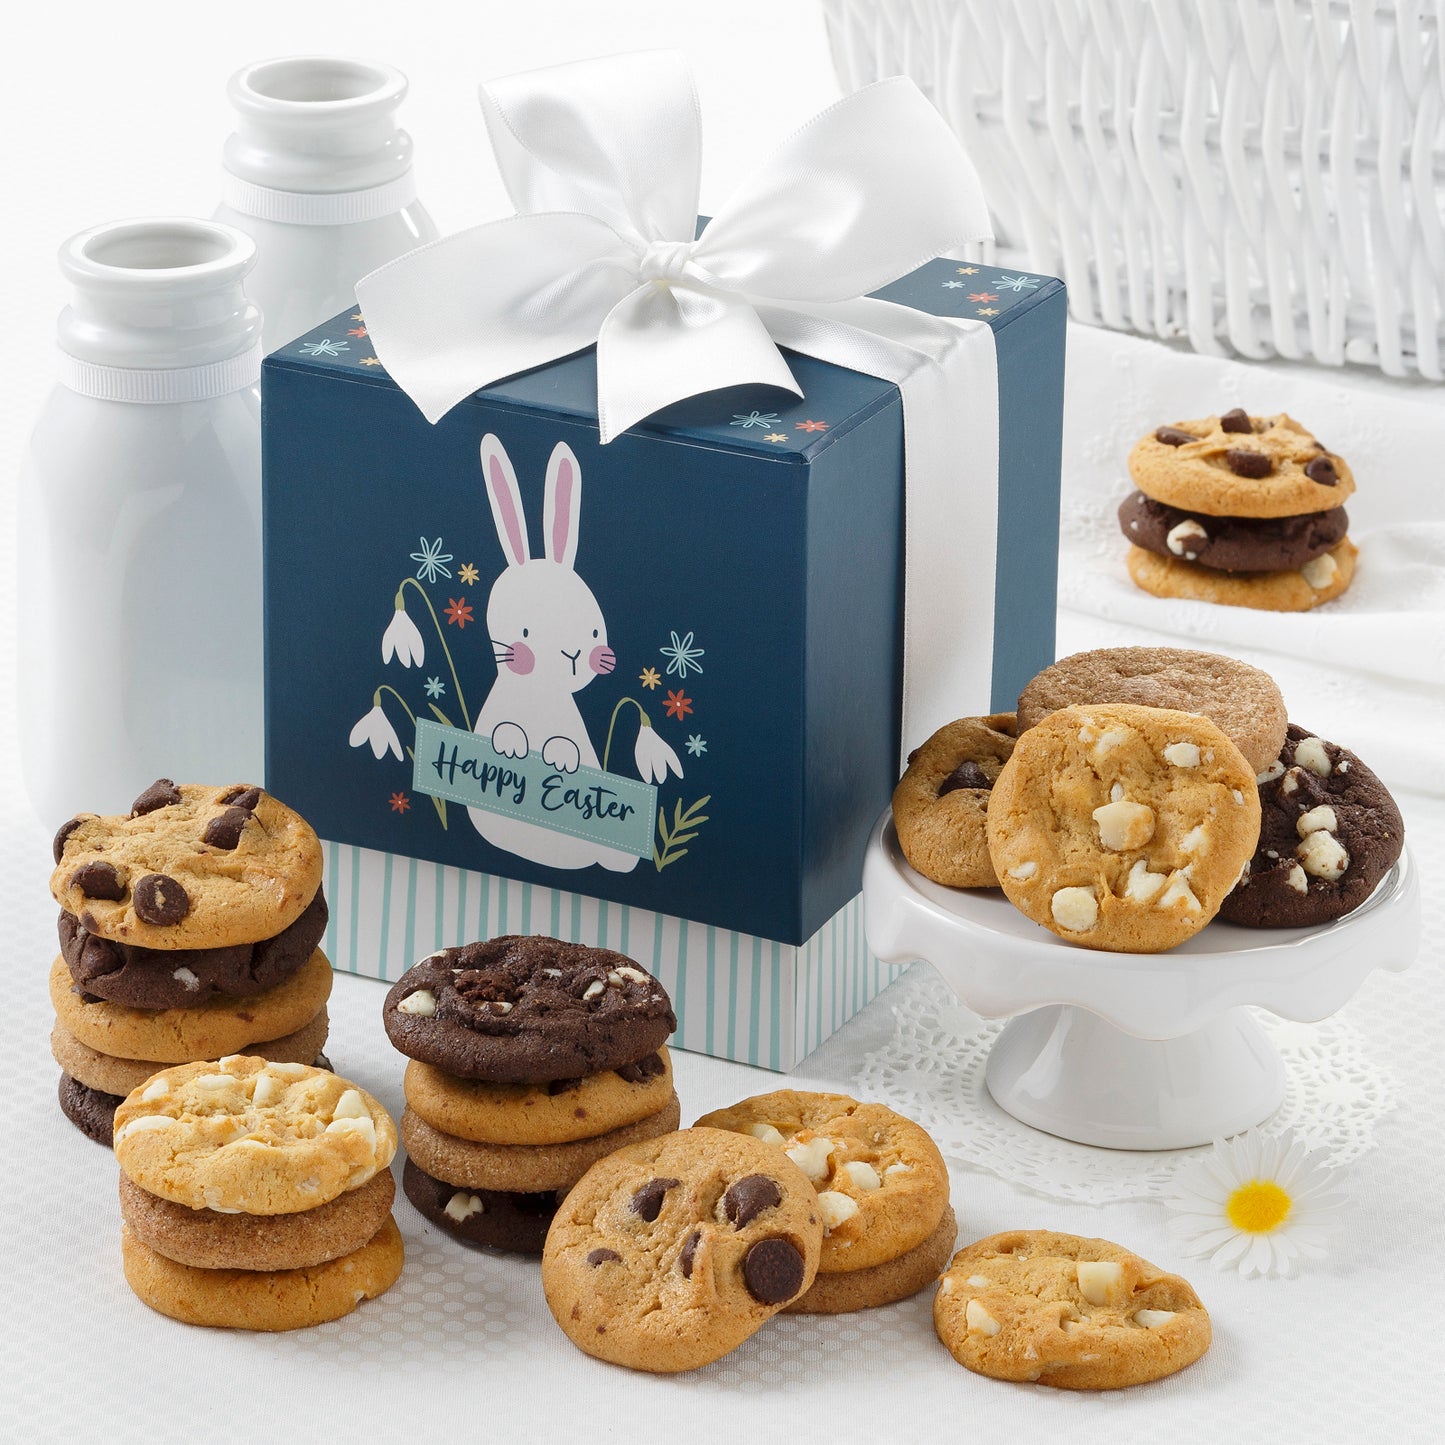 A dark blue Easter themed mini gift box surrounded with an assortment of nibblers